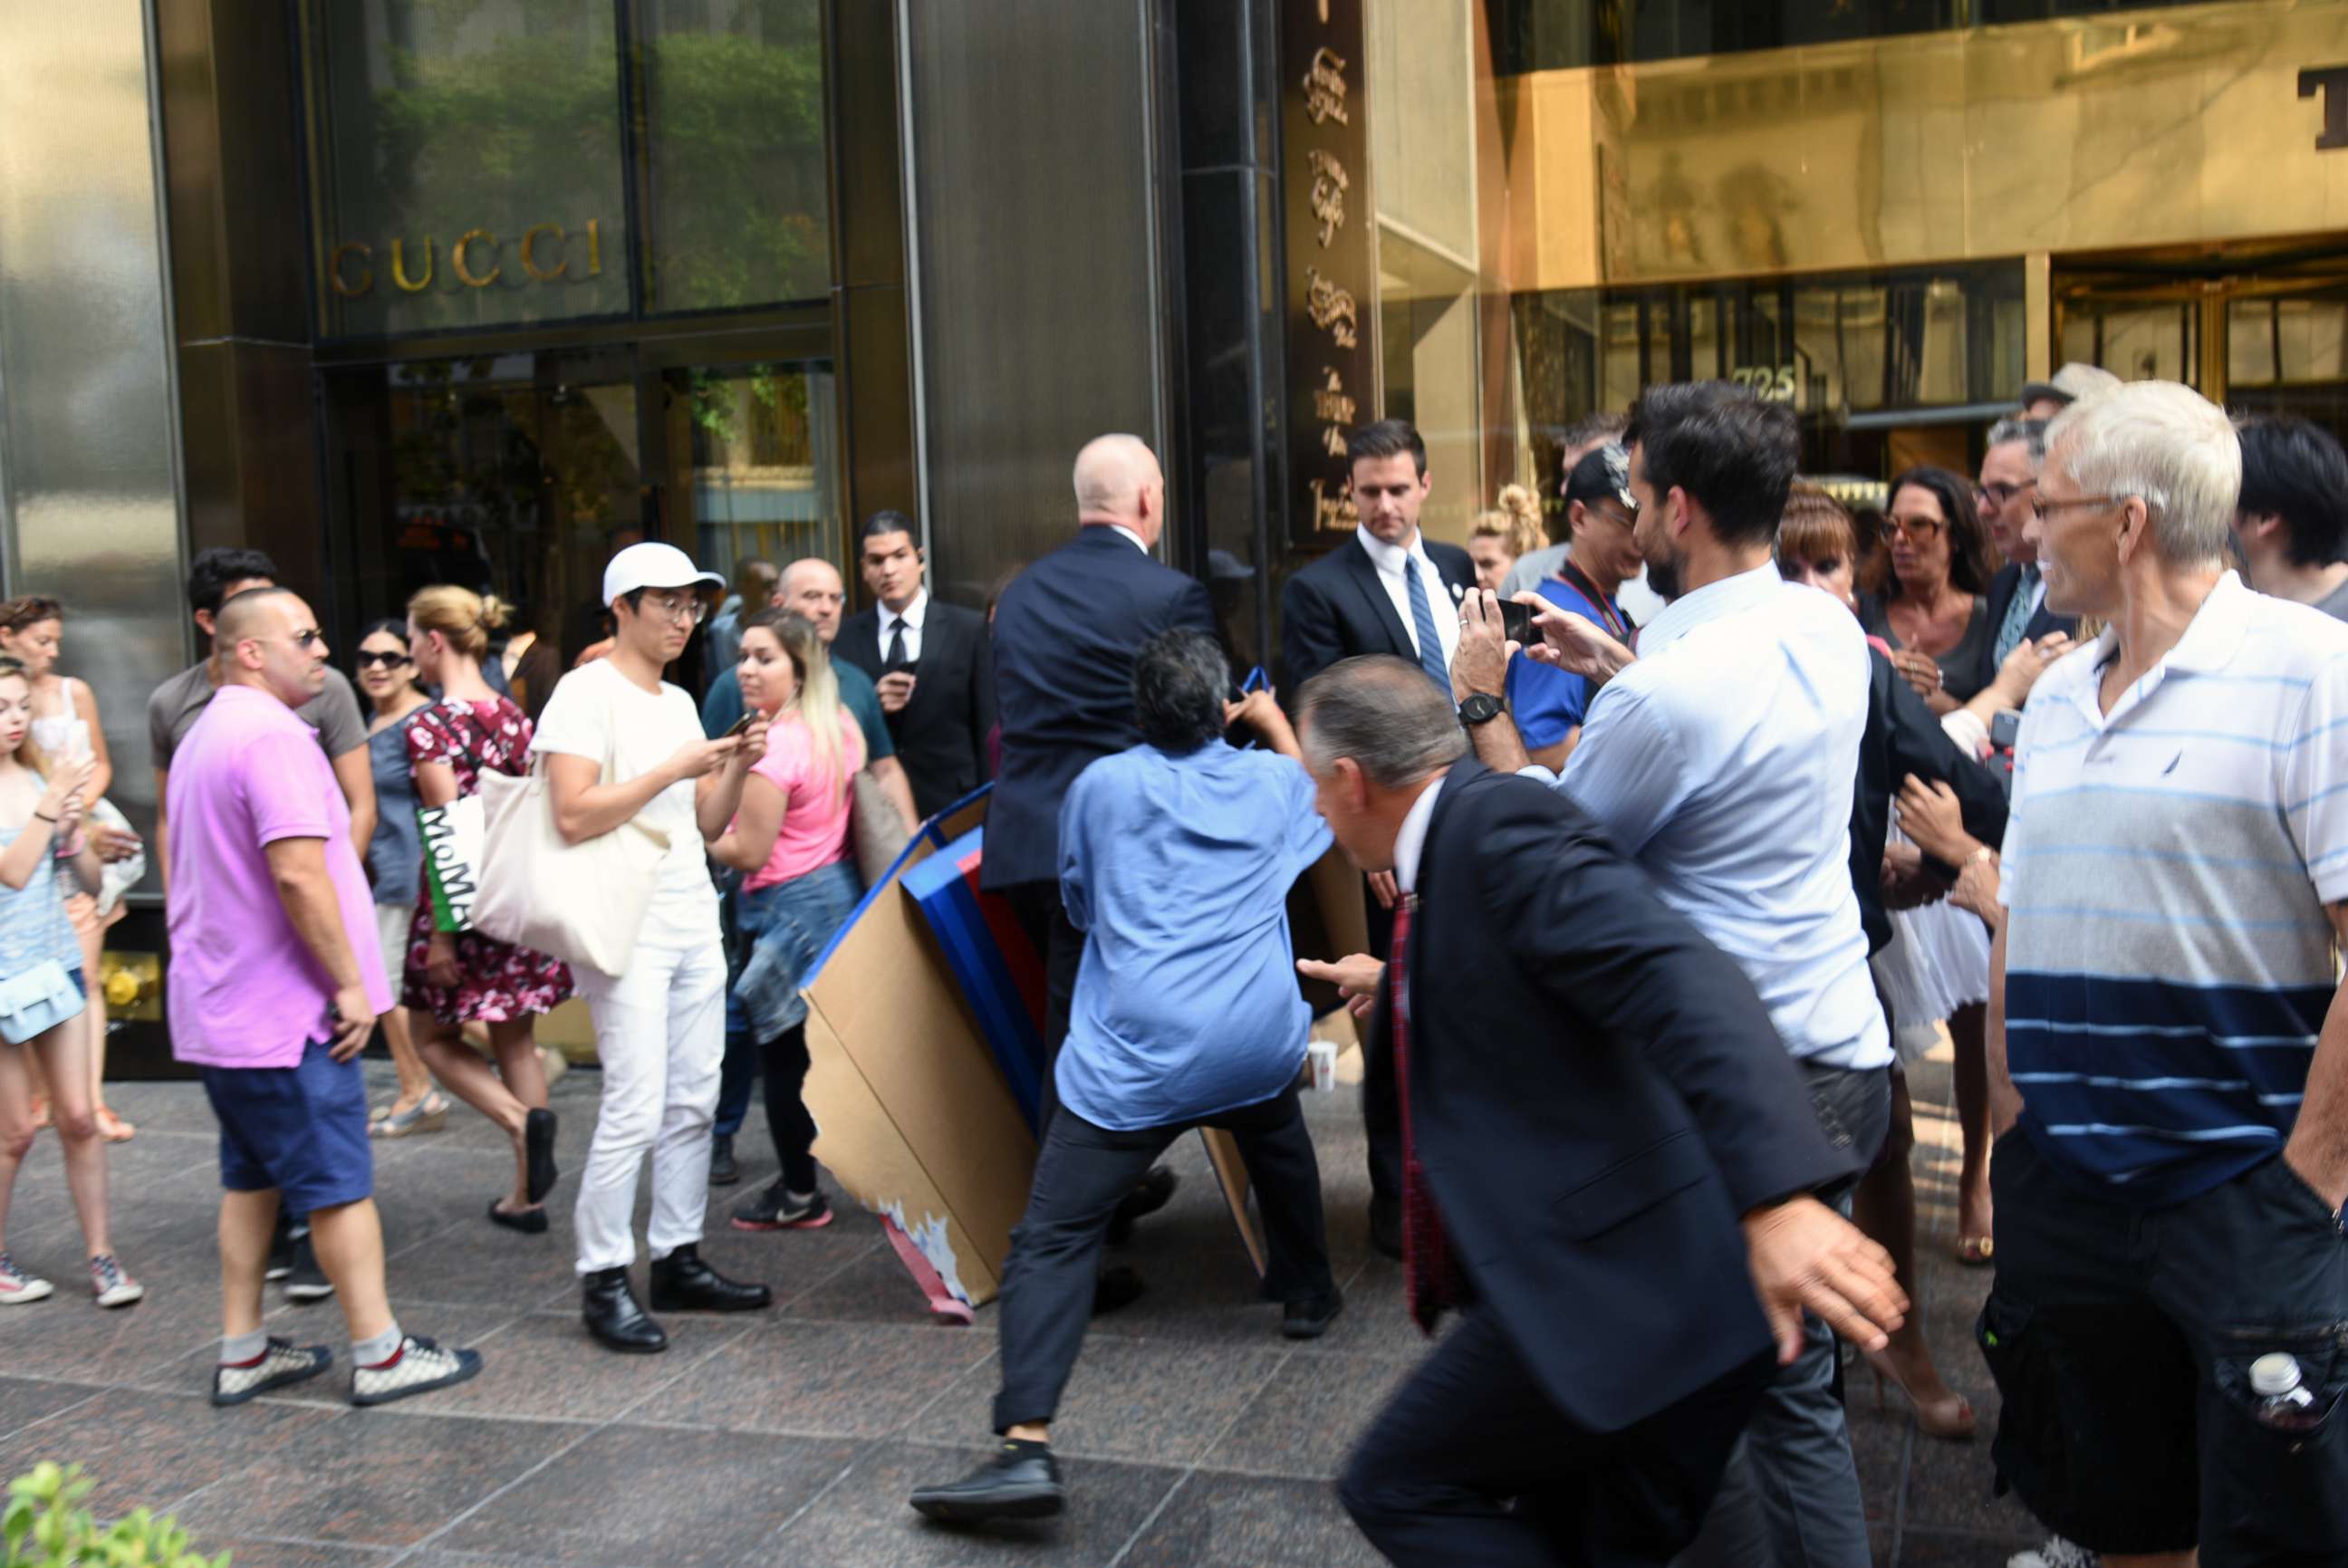 PHOTO: In this Sep. 3, 2015 file photo Trump's director of security and longtime bodyguard Keith Schiller with demonstrator Efrain Galicia (blue shirt) at Trump Tower, New York.